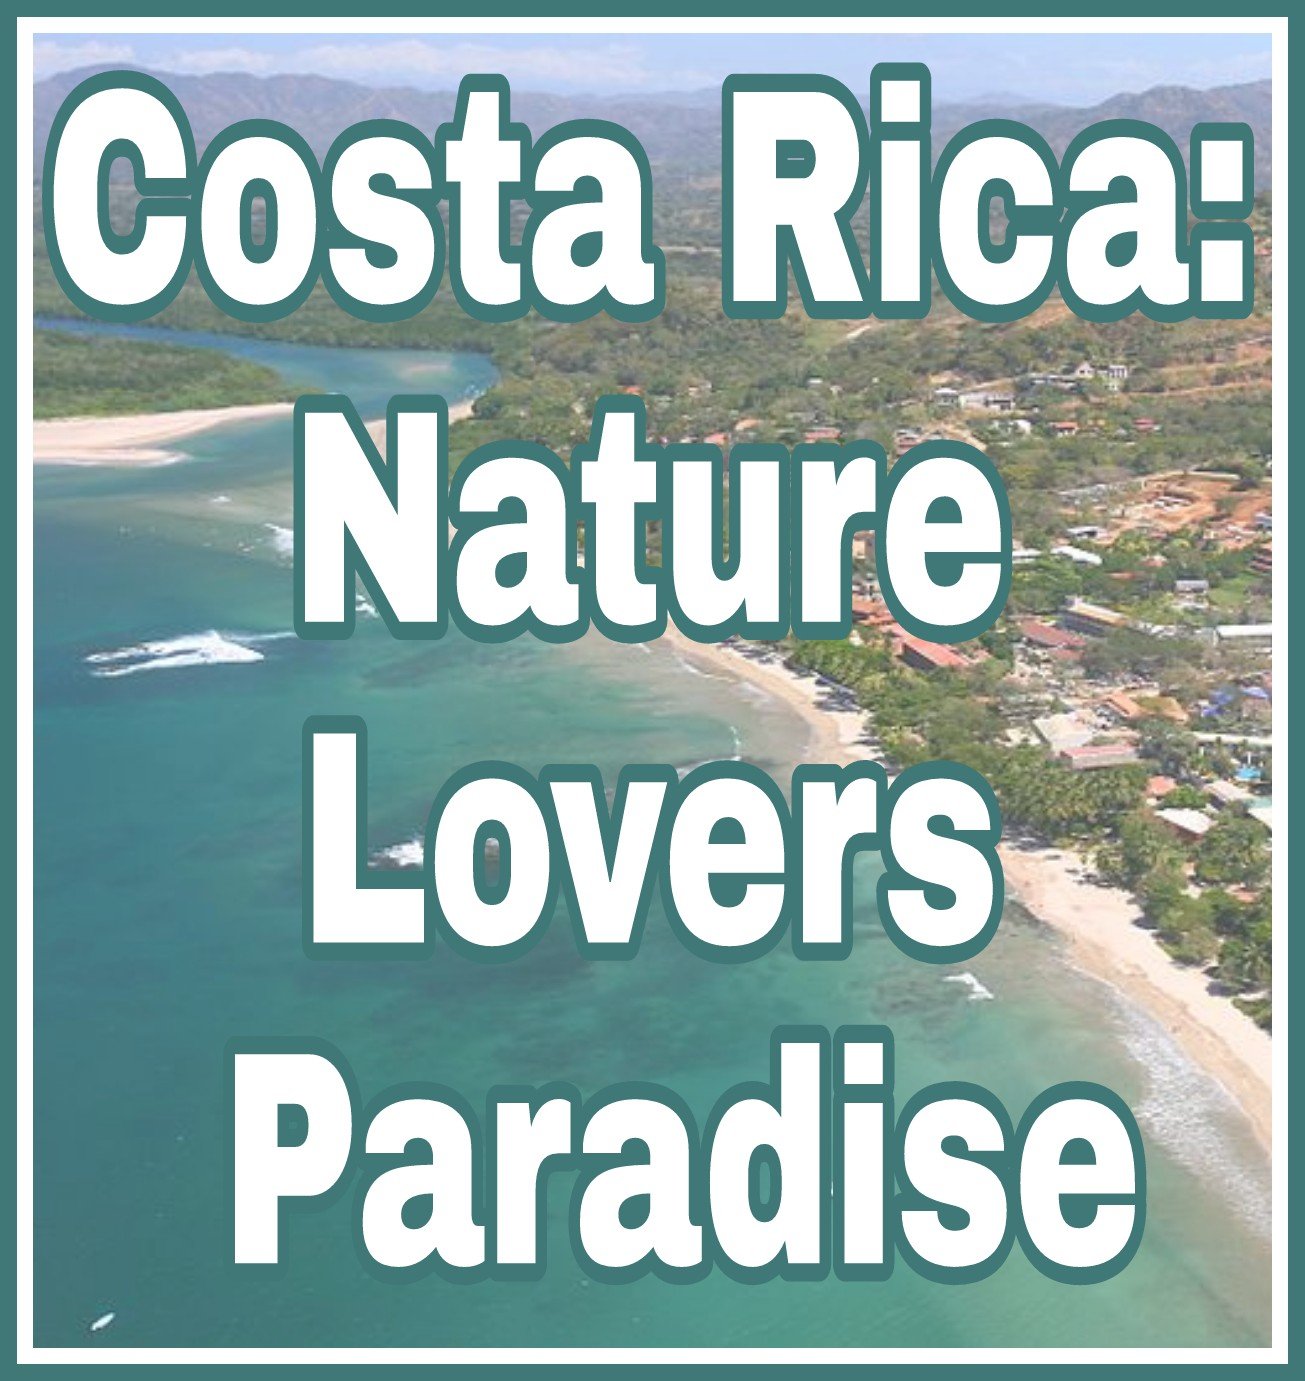 Title Costa Rica: Nature Lovers Paradise on faded background image of Costa Rica coastline.